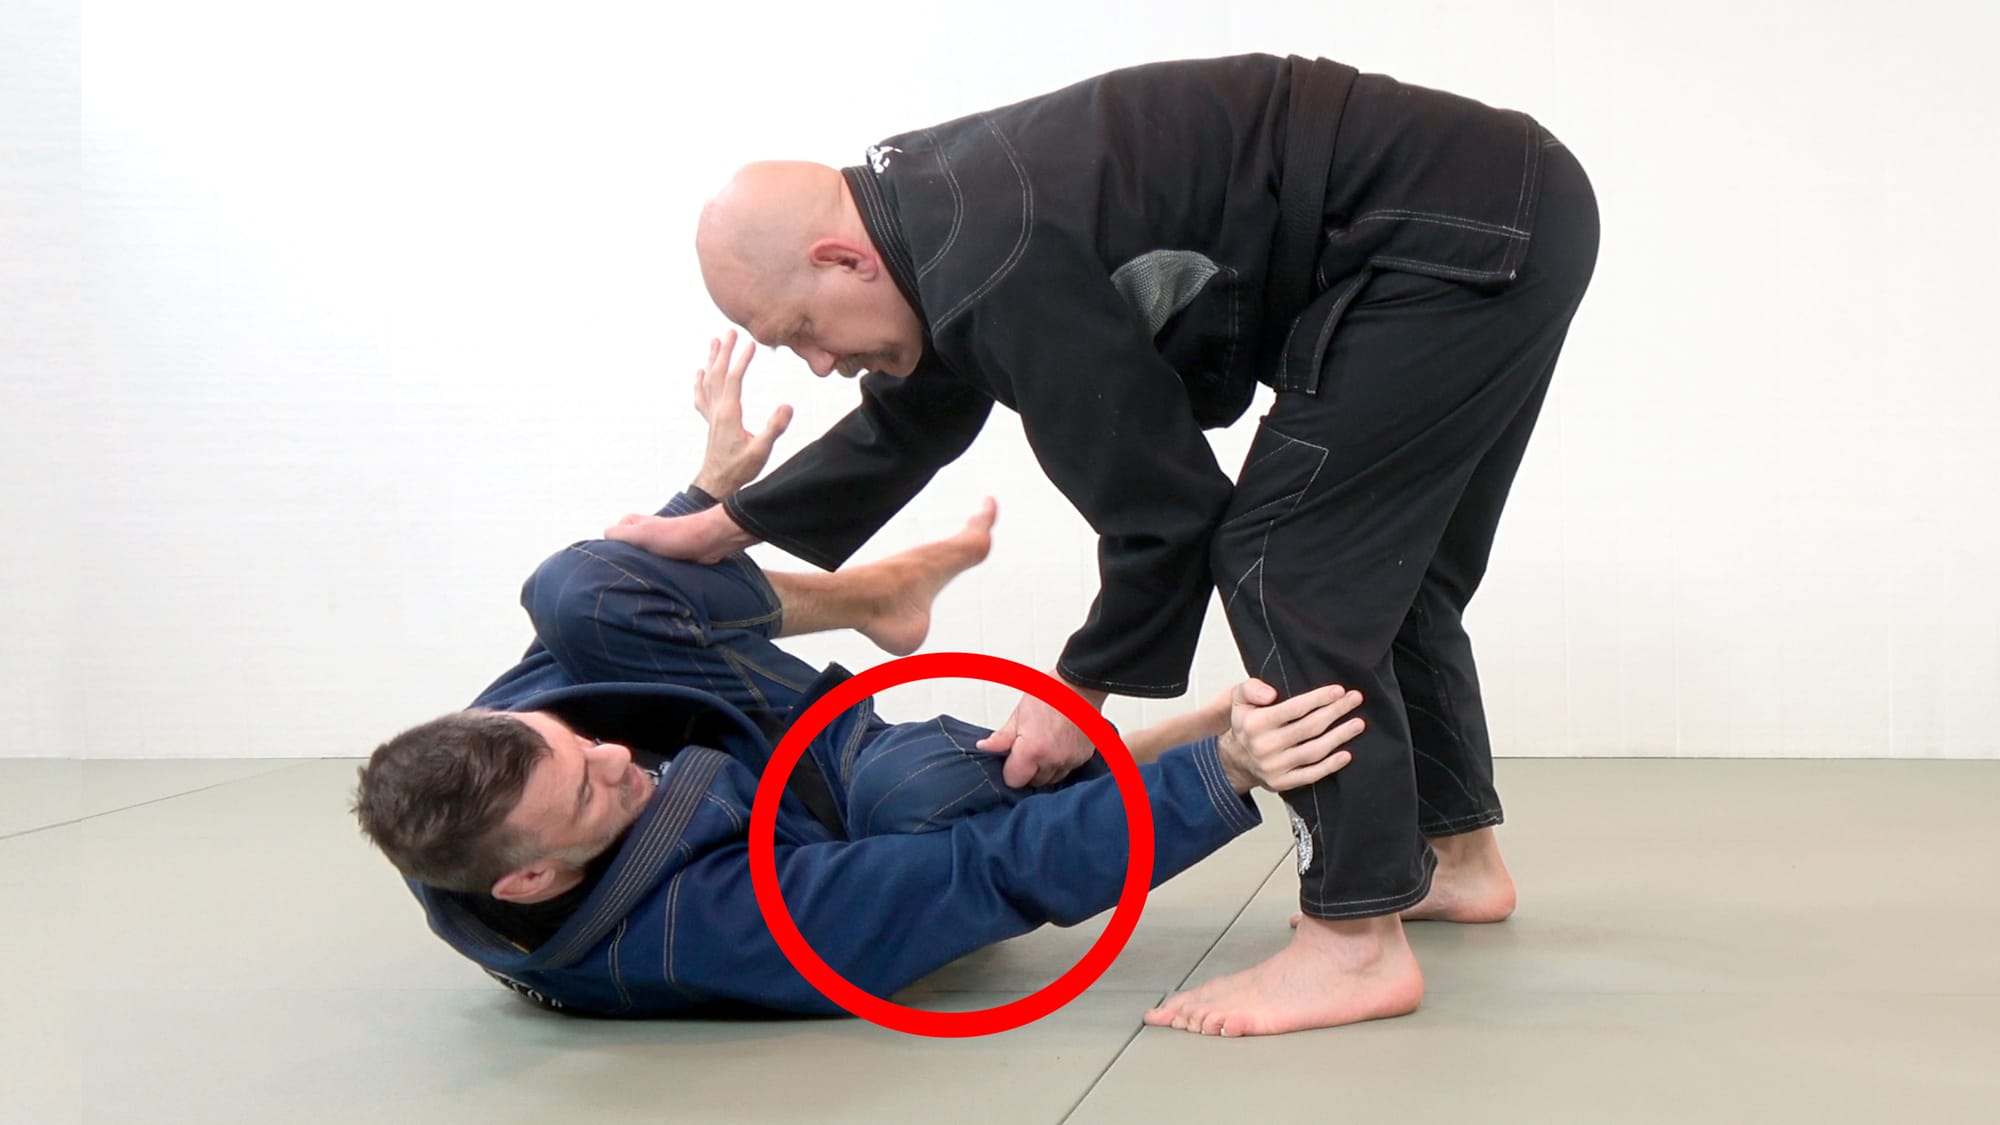 Maintaining Elbow-Knee Connection While Framing Against the Opponent's Leg